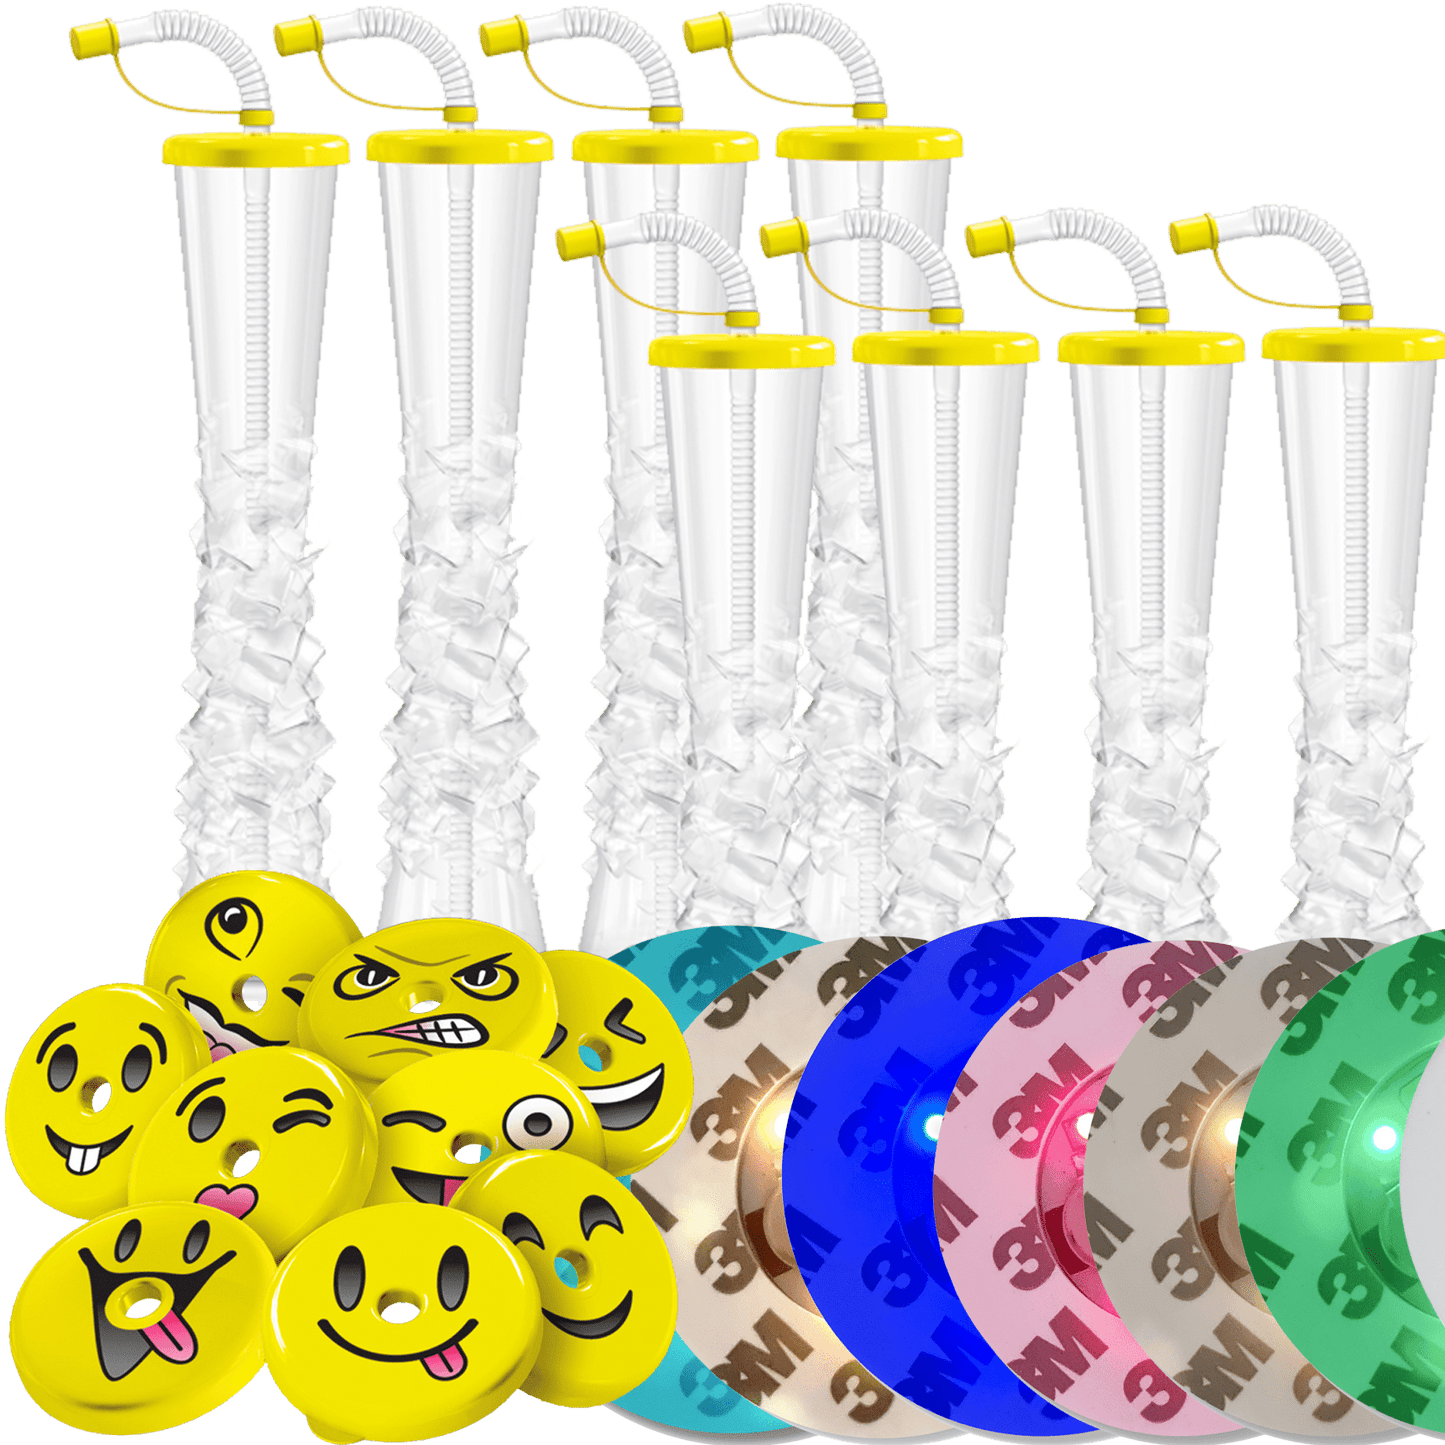 Sweet World USA Yard Cups Smiley Face Ice Yard Cups with LED Coasters (54 Cups & LED Coasters - Yellow Lids) - for Margaritas, Cold Drinks, Frozen Drinks, Kids Parties - 17 oz. (500 ml) cups with lids and straws